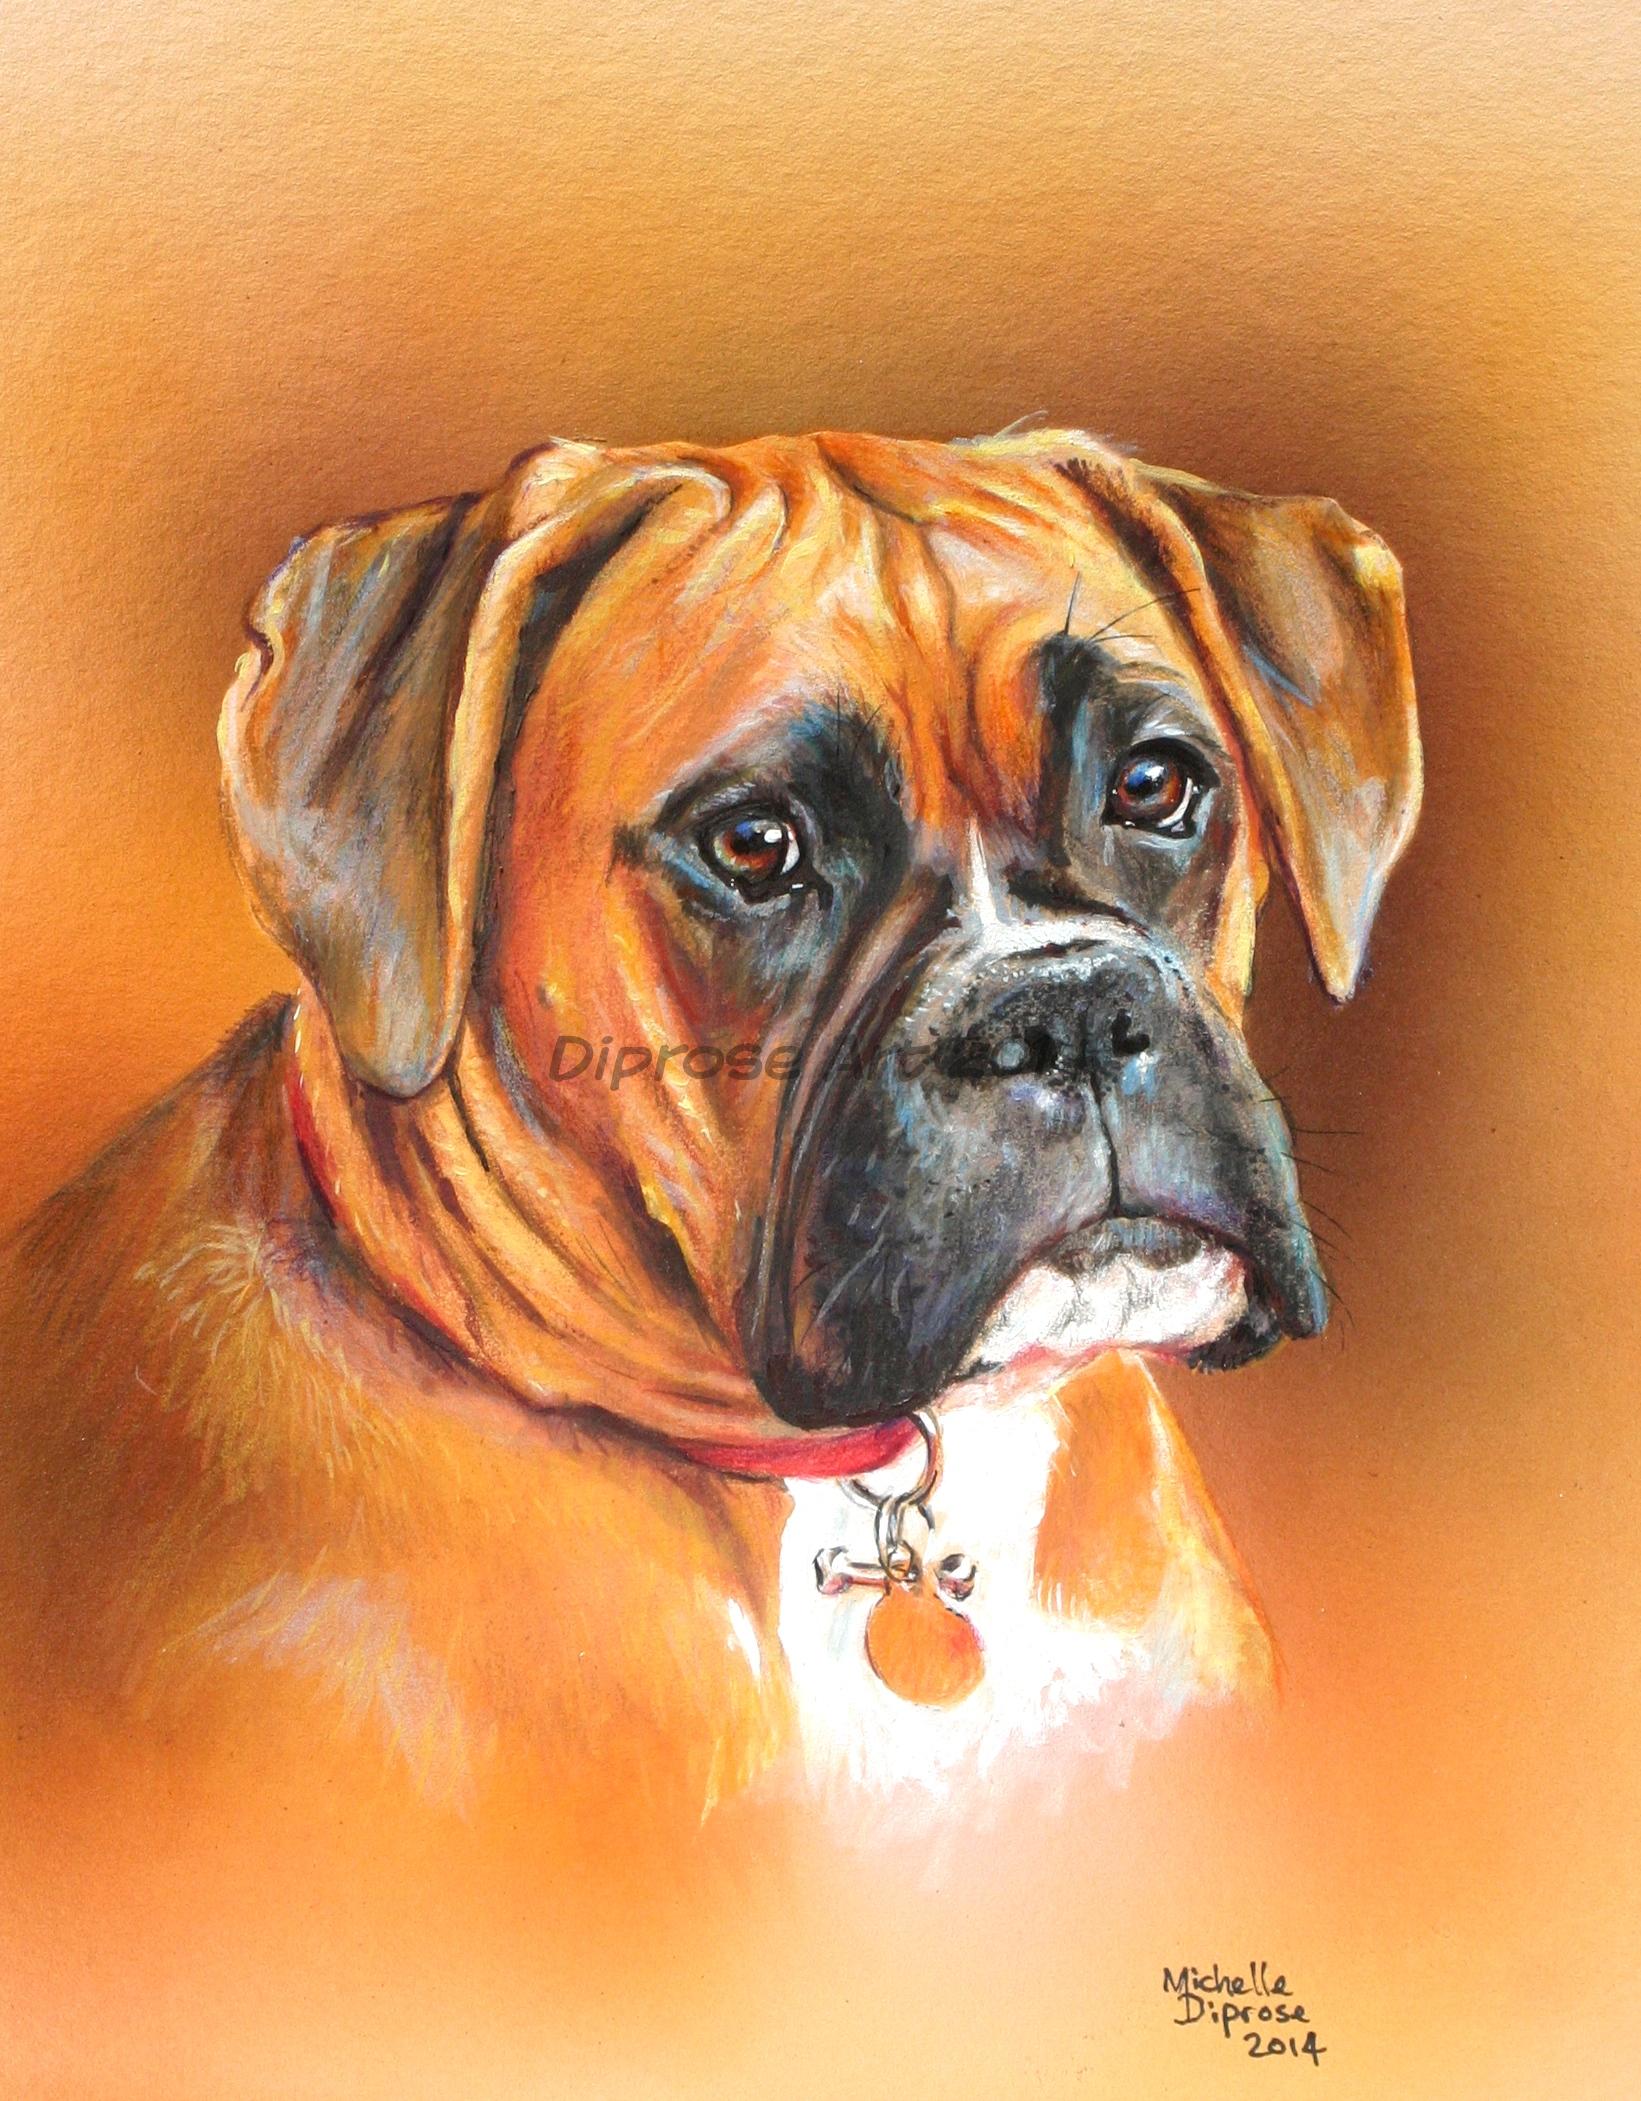 acrylics on board - approx A4 - pet dog portrait - I love the rich red colour of this beautiful boxer - she has the most wonderful expressive face too.